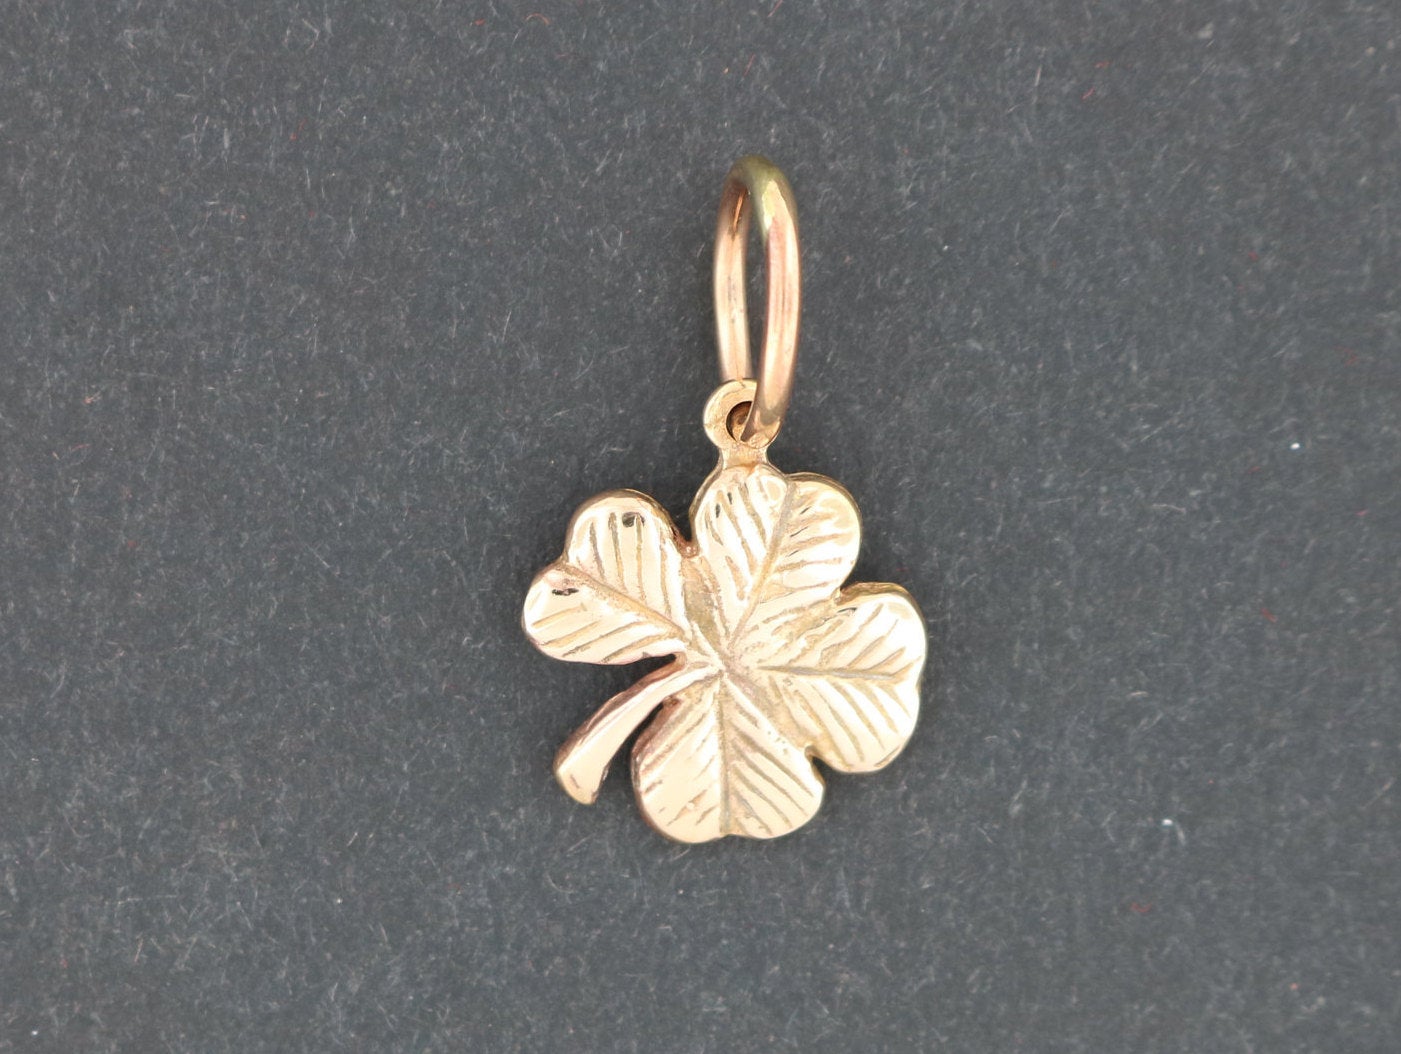 Small Four-Leaf Clover Charm in Sterling Silver or Antique Bronze, Sterling Silver Clover Pendant, Antique Bronze Clover Pendant, Lucky Clover Pendant, Lucky Charm Pendant, SIlver Four Leaf Clover, Bronze Four Leaf Clover, Silver Celtic Jewelry, Silver Celtic Jewellery, Bronze Celtic Jewelry, Bronze Celtic Jewellery, Silver Clover Charm, Bronze Clover Charm, Lucky Charm Jewelry, Lucky Charm Jewellery